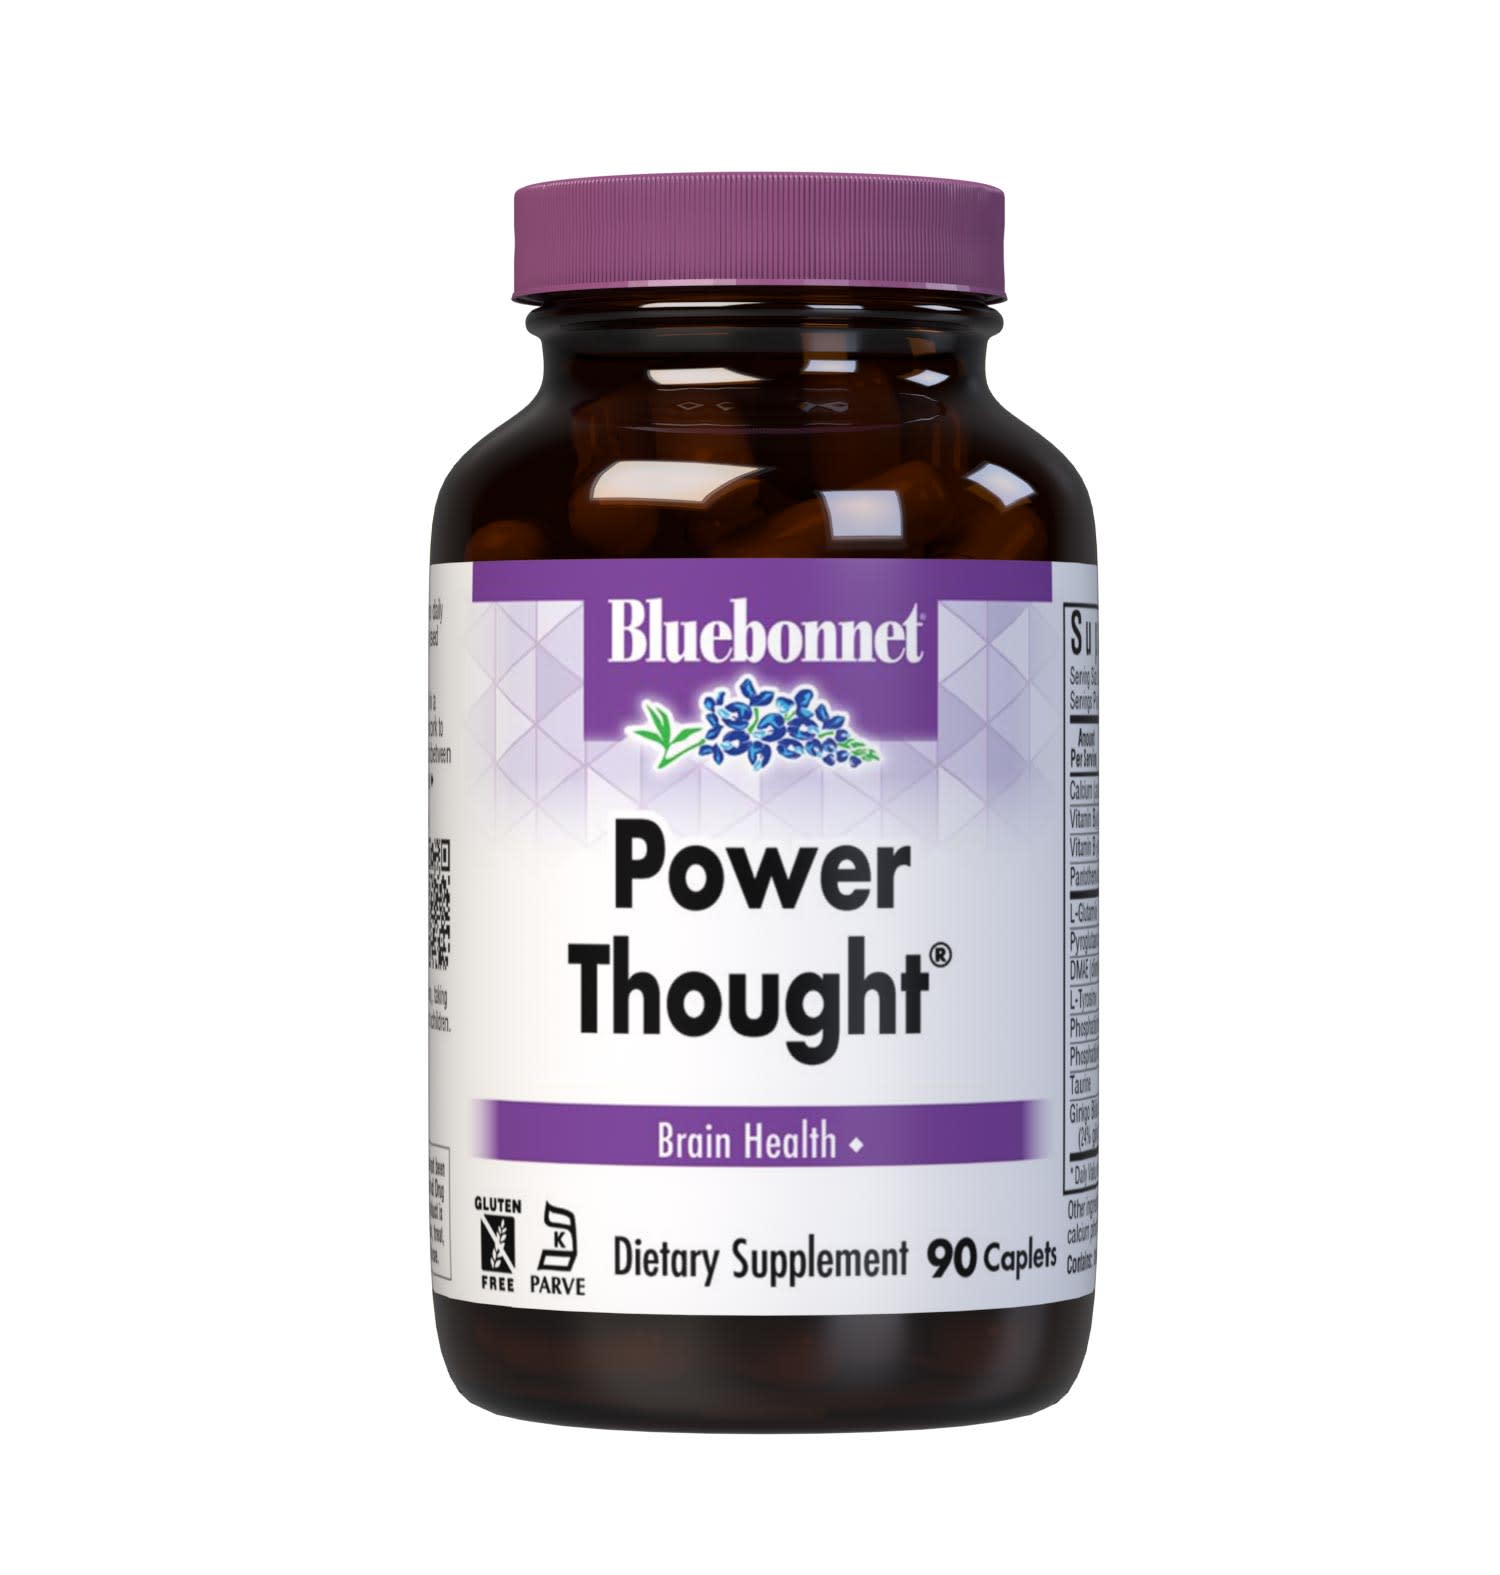 Bluebonnet’s Power Thought 90 Caplets are scientifically formulated with a powerful spectrum of highly advanced cognitive-enhancing nutrients, including sustainably-sourced botanicals, DMAE, phosphatidylserine and phosphatidylcholine, for optimal brain health. This complementary blend works to facilitate the communication between nerve cells, thereby enhancing the brain's ability to process, retain, and retrieve information for healthy cognitive function. #size_90 count